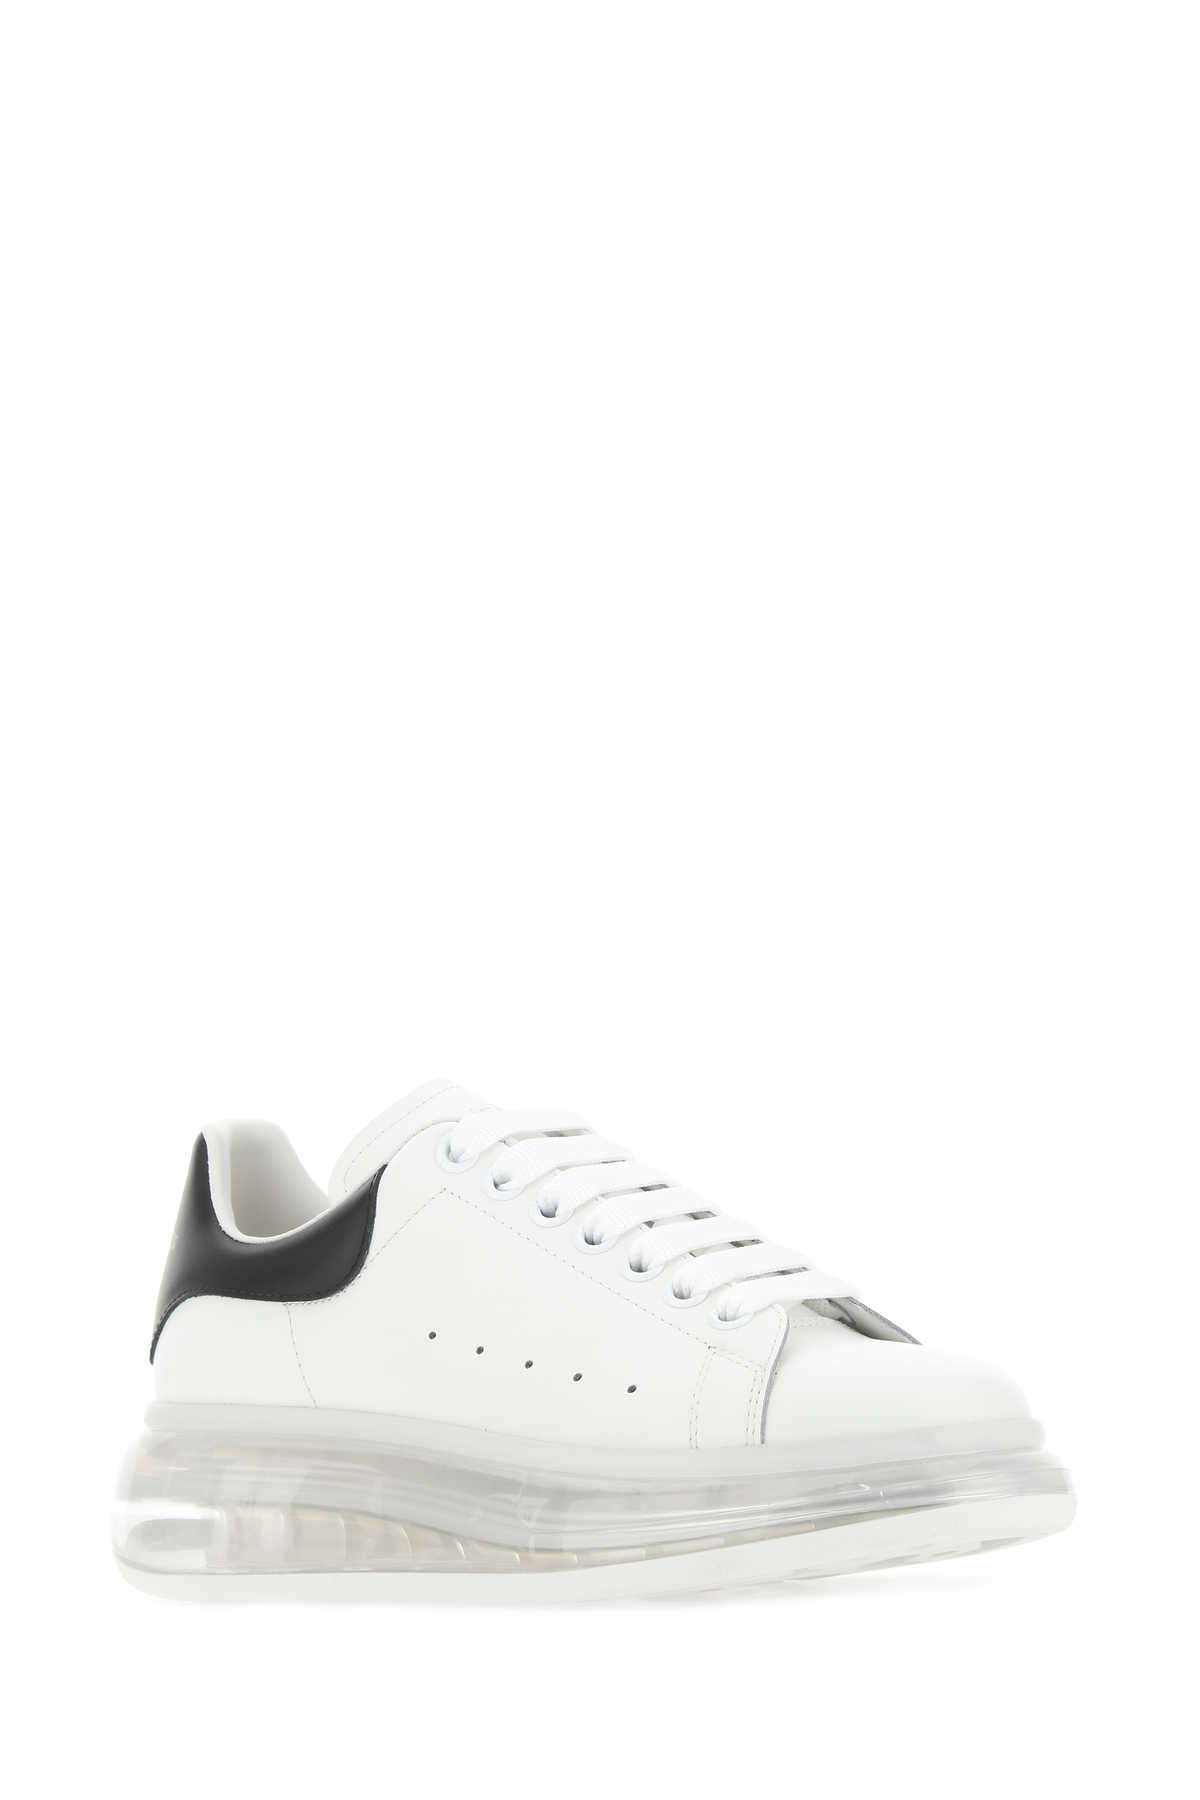 Alexander Mcqueen White Leather Sneakers With Black Heel In 9061